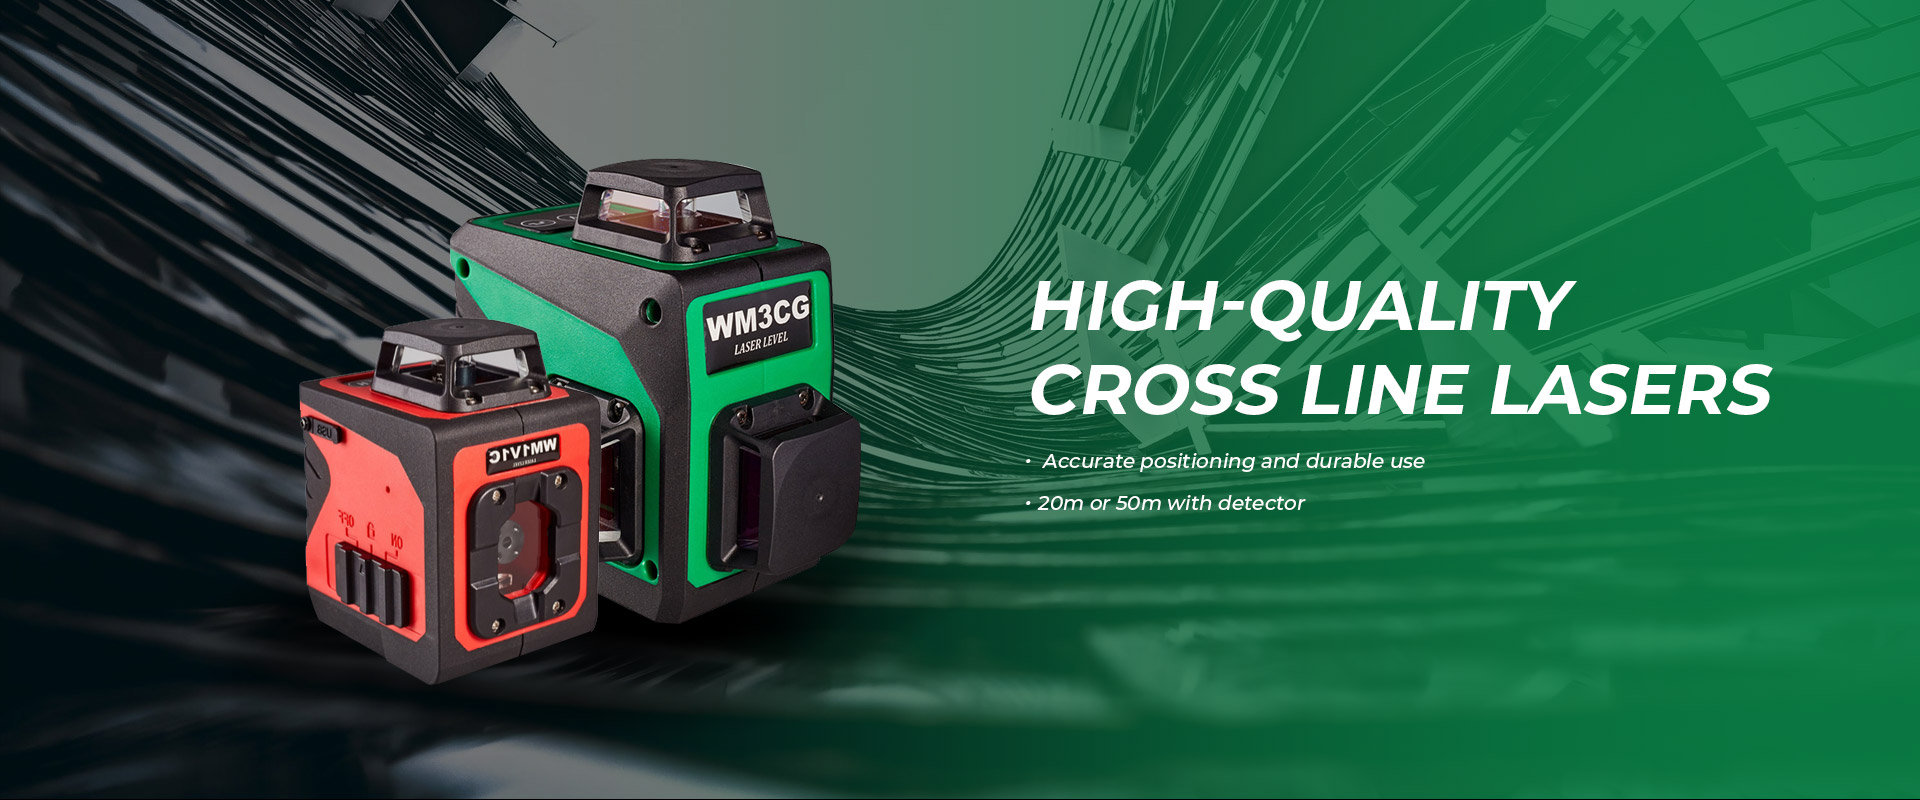 High-quality Cross Line Lasers